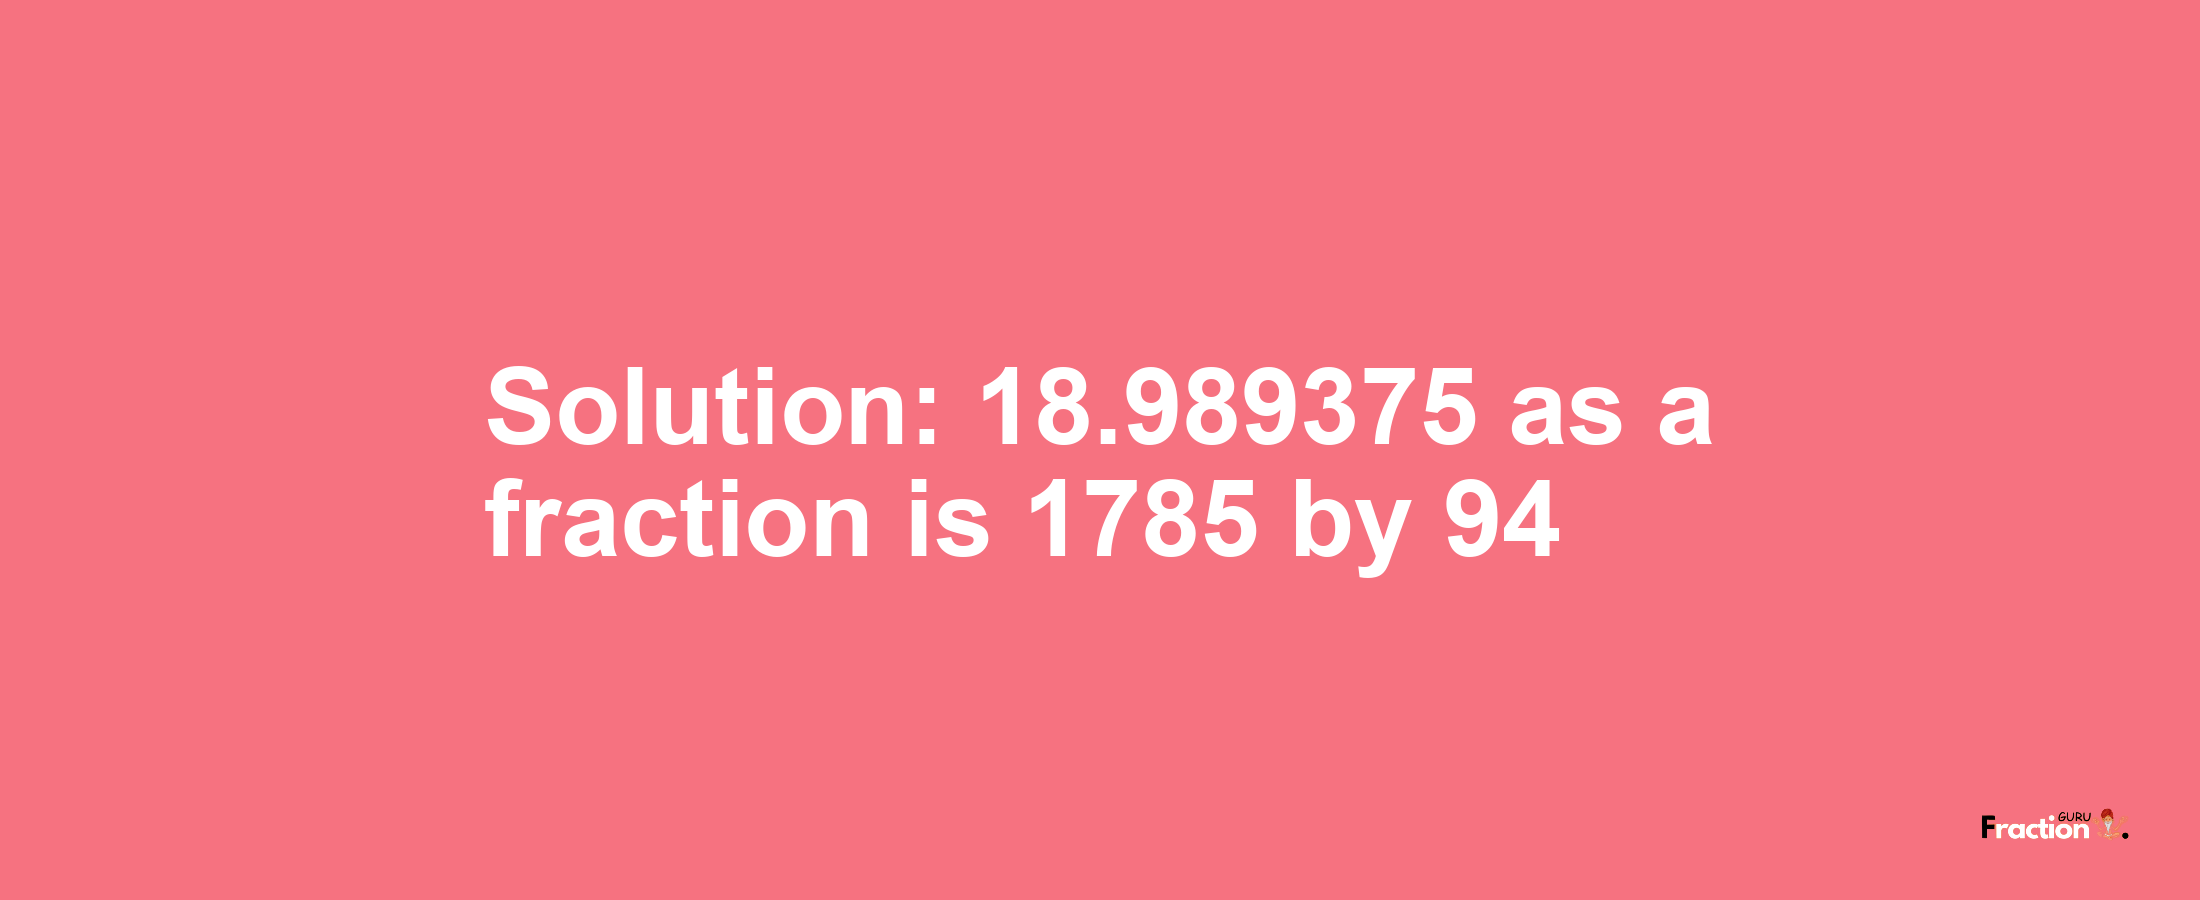 Solution:18.989375 as a fraction is 1785/94